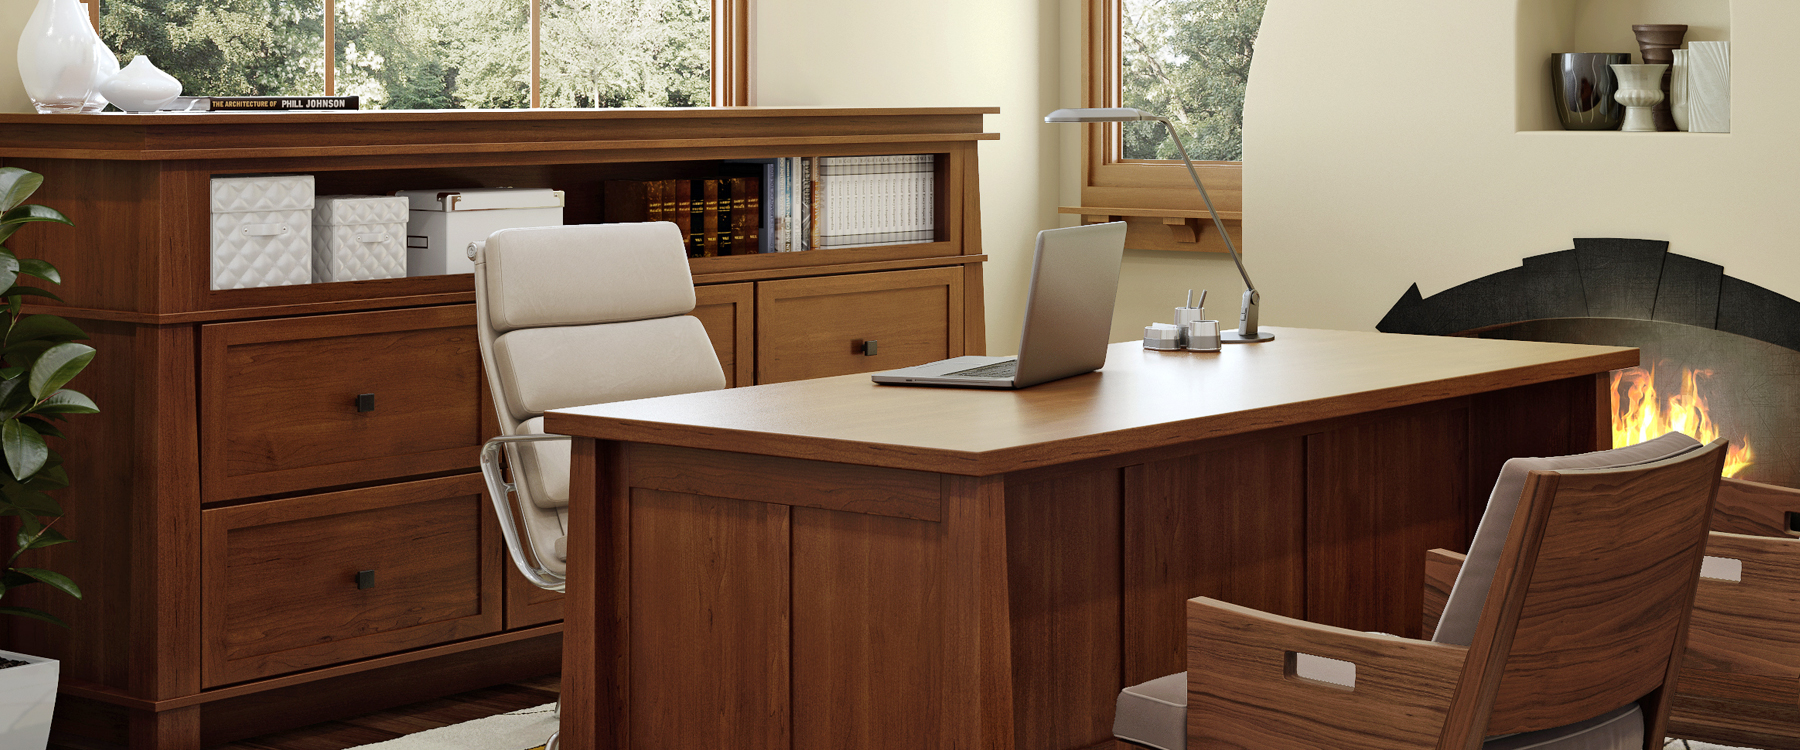 Comfy Office Space with Desk, Chair, and Brown Cabinets | Canyon Creek Cabinet Company